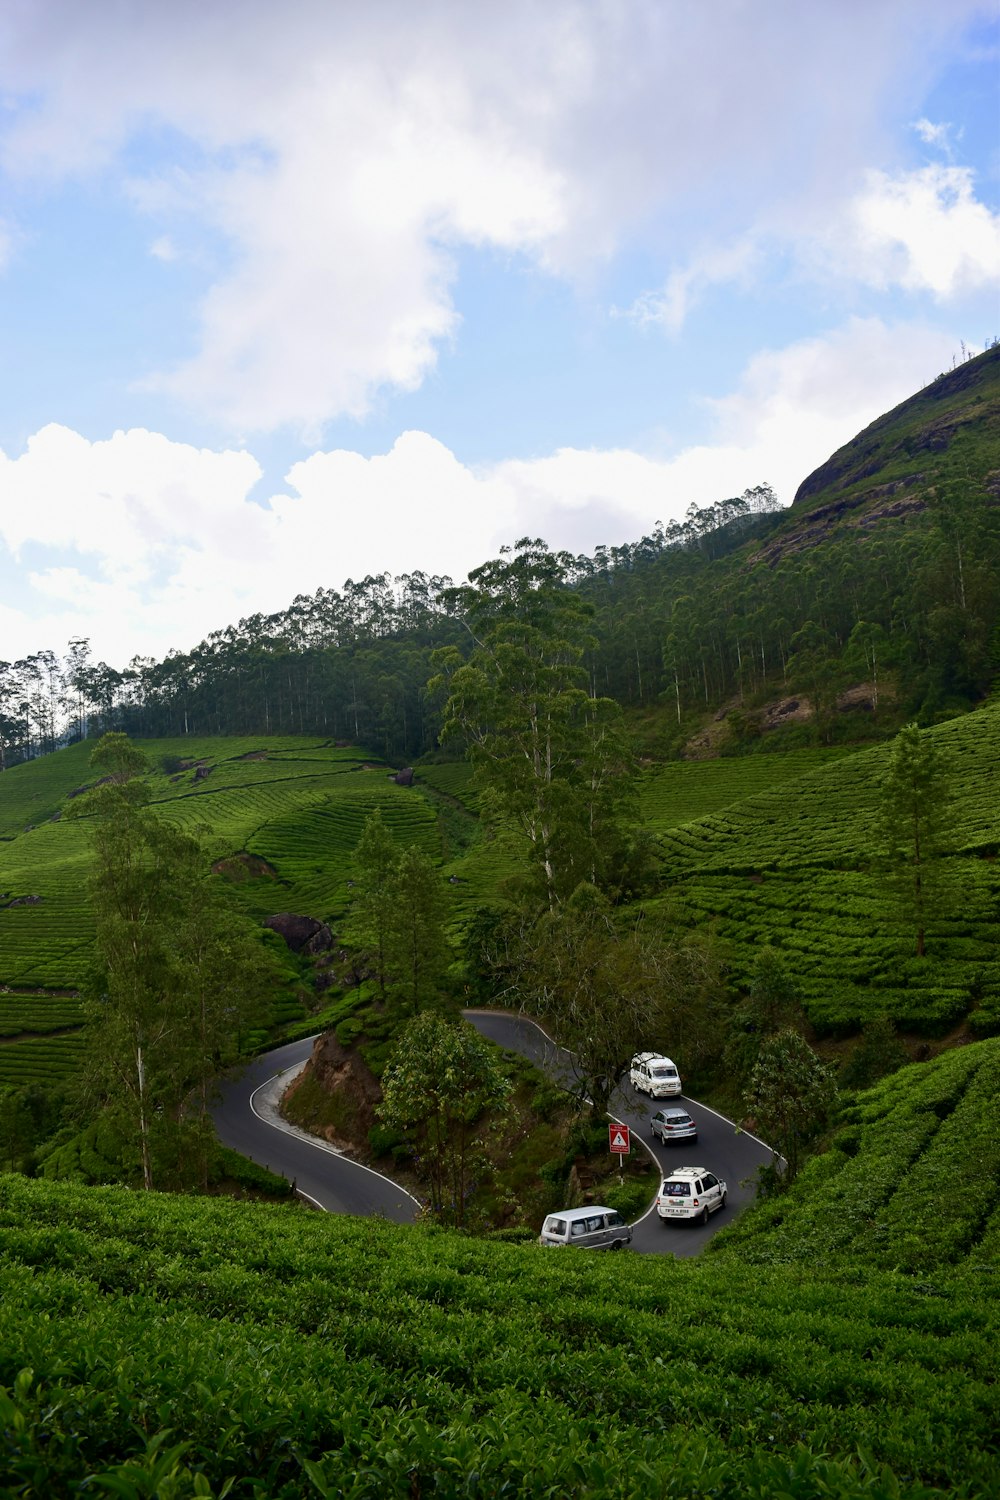 cars driving on a winding road in the middle of a tea estate